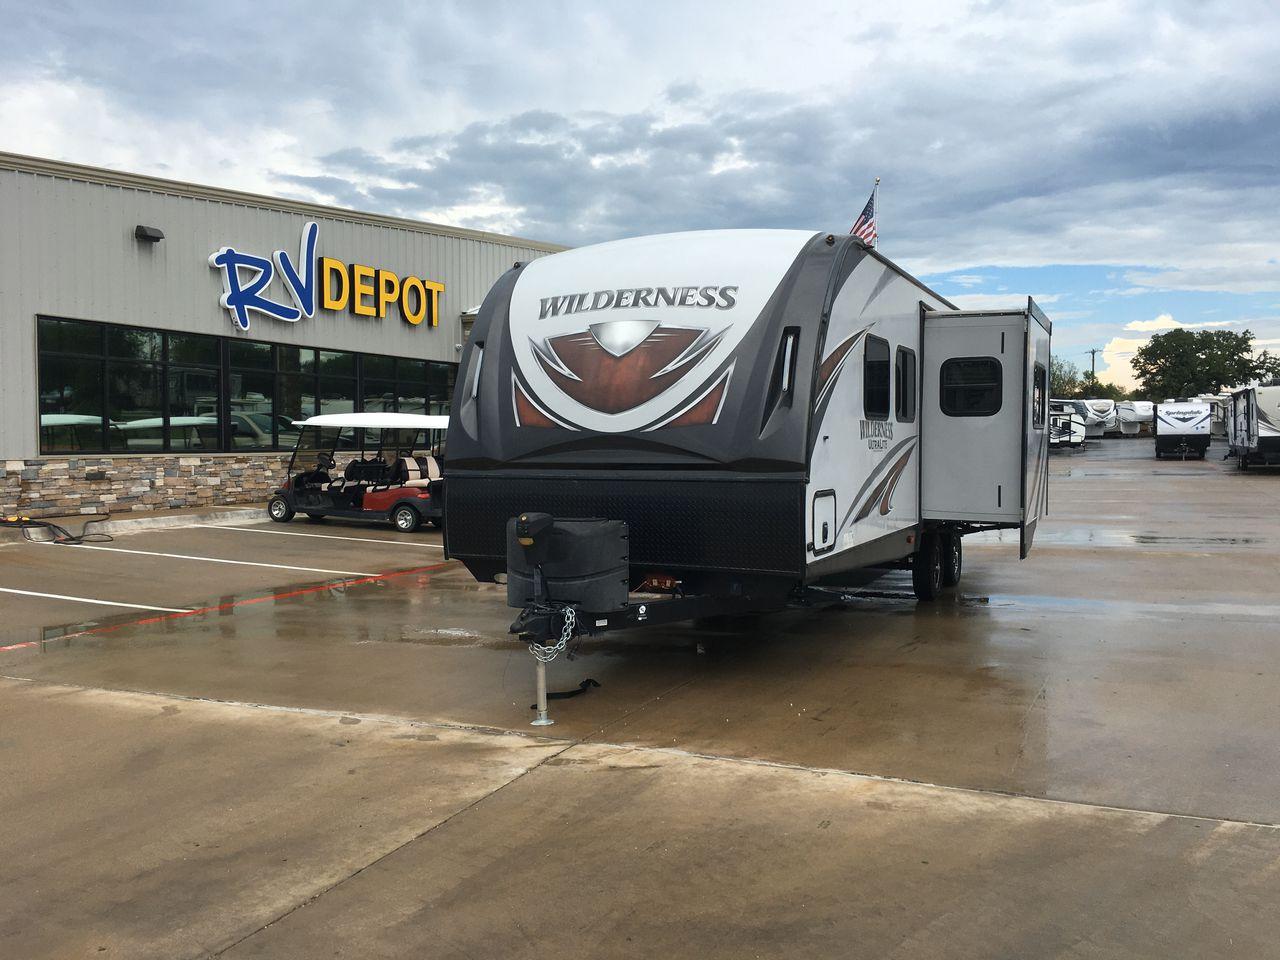 2018 HEARTLAND WILDERNESS 2450FB (5SFNB3022JN) , Length: 30.33 ft. | Dry Weight: 5,433 lbs. | Gross Weight: 6,900 lbs. | Slides: 1 transmission, located at 4319 N Main Street, Cleburne, TX, 76033, (817) 221-0660, 32.435829, -97.384178 - With the 2018 Heartland Recreation Wilderness 2450FB travel trailer, set out on an outdoor adventure. For those looking for an unforgettable camping experience, this well-designed RV offers the ideal home away from home thanks to its innovative design, comfort, and functionality. The dimensions of t - Photo #0